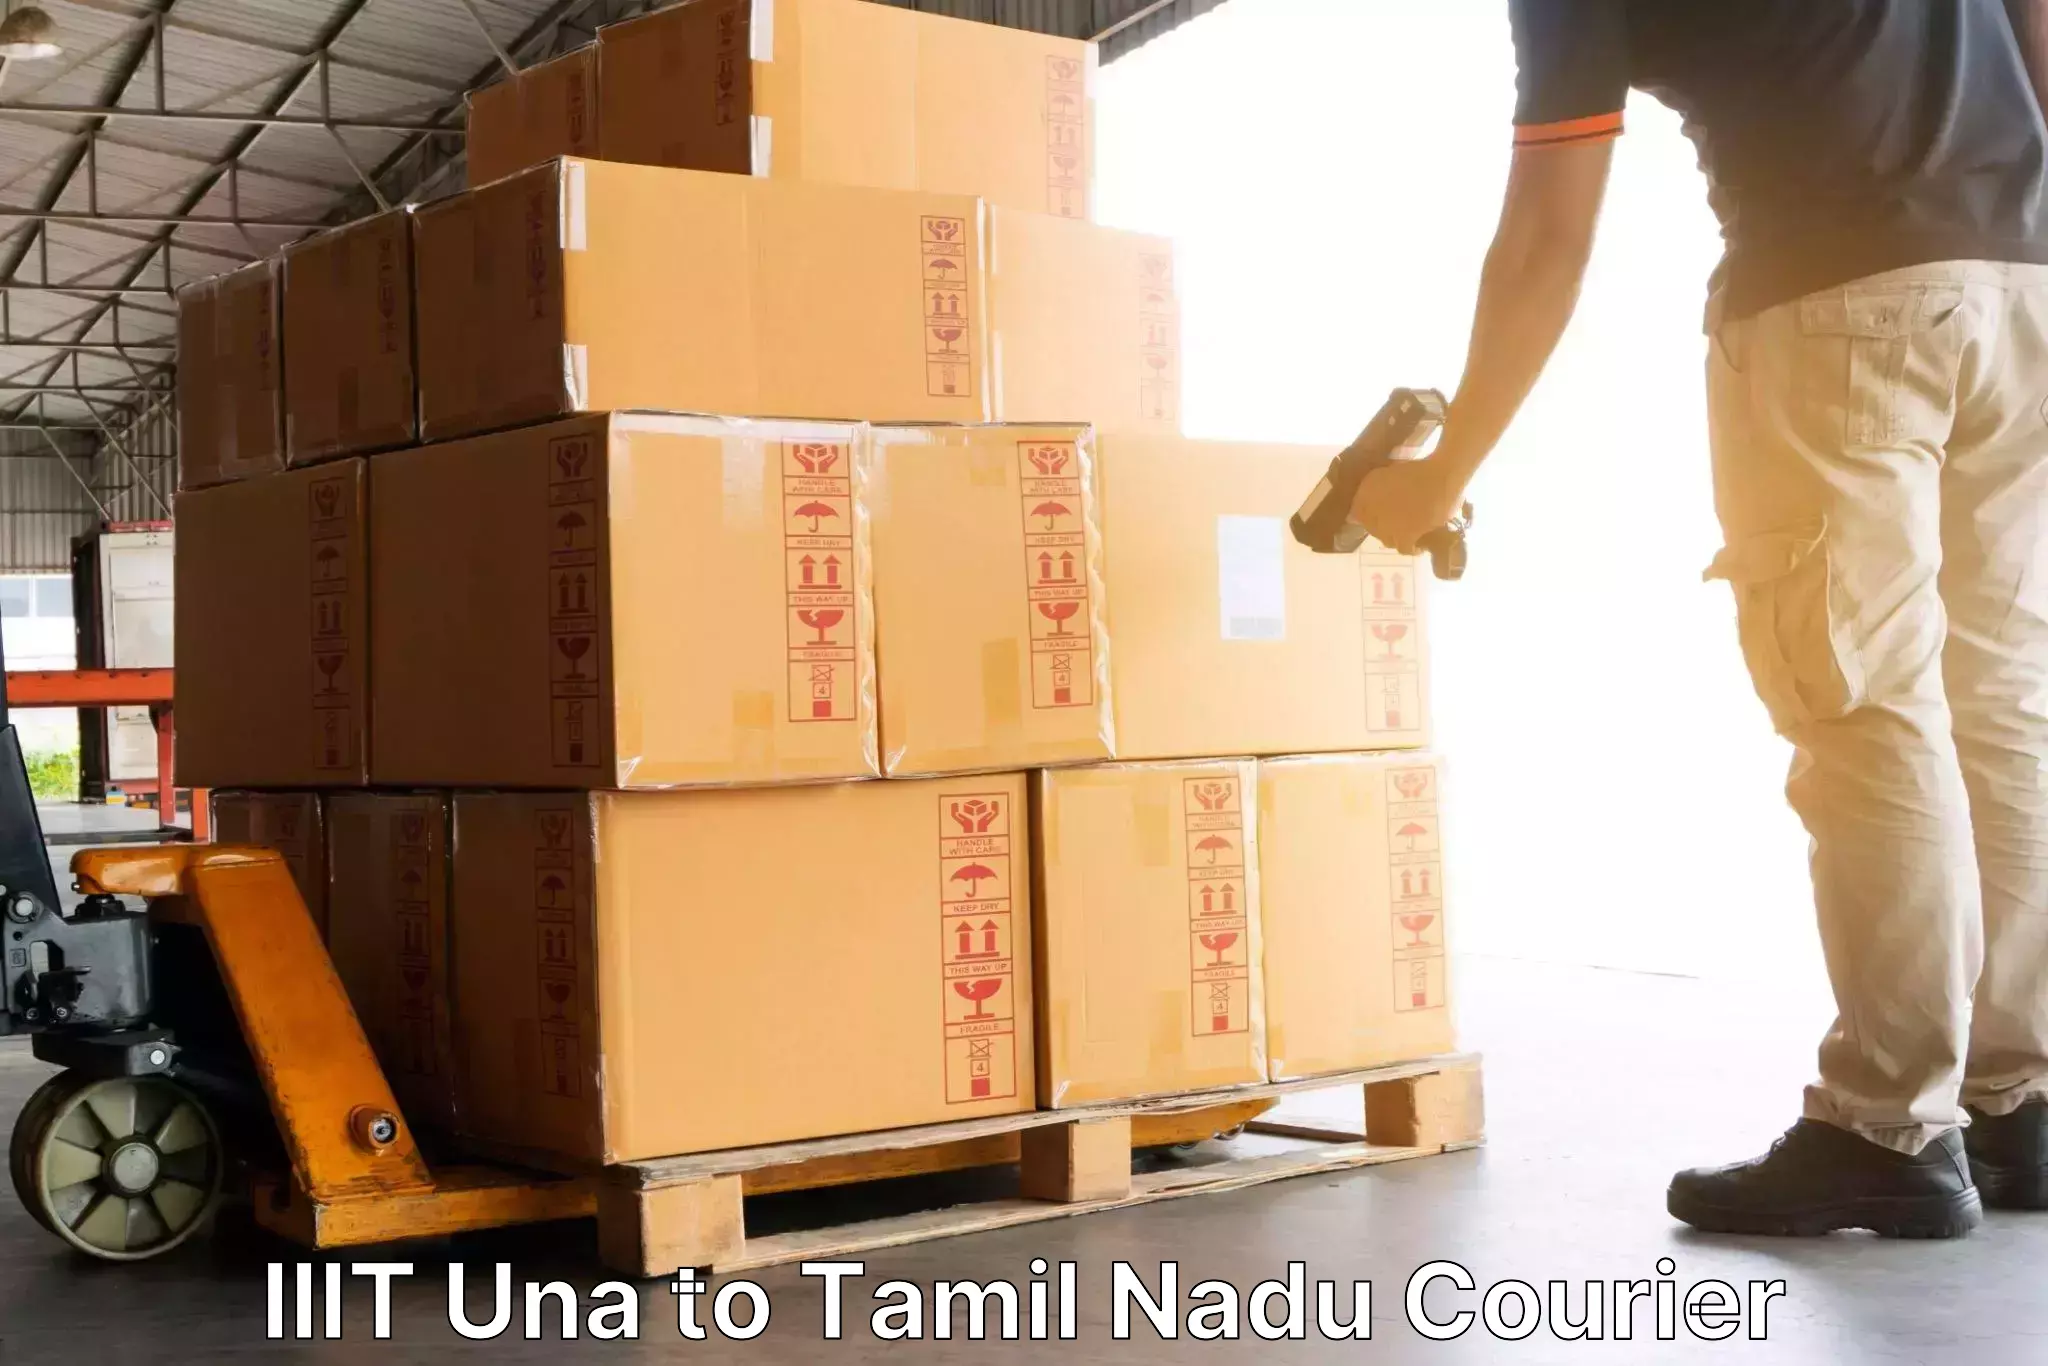 Full-service courier options IIIT Una to Chennai